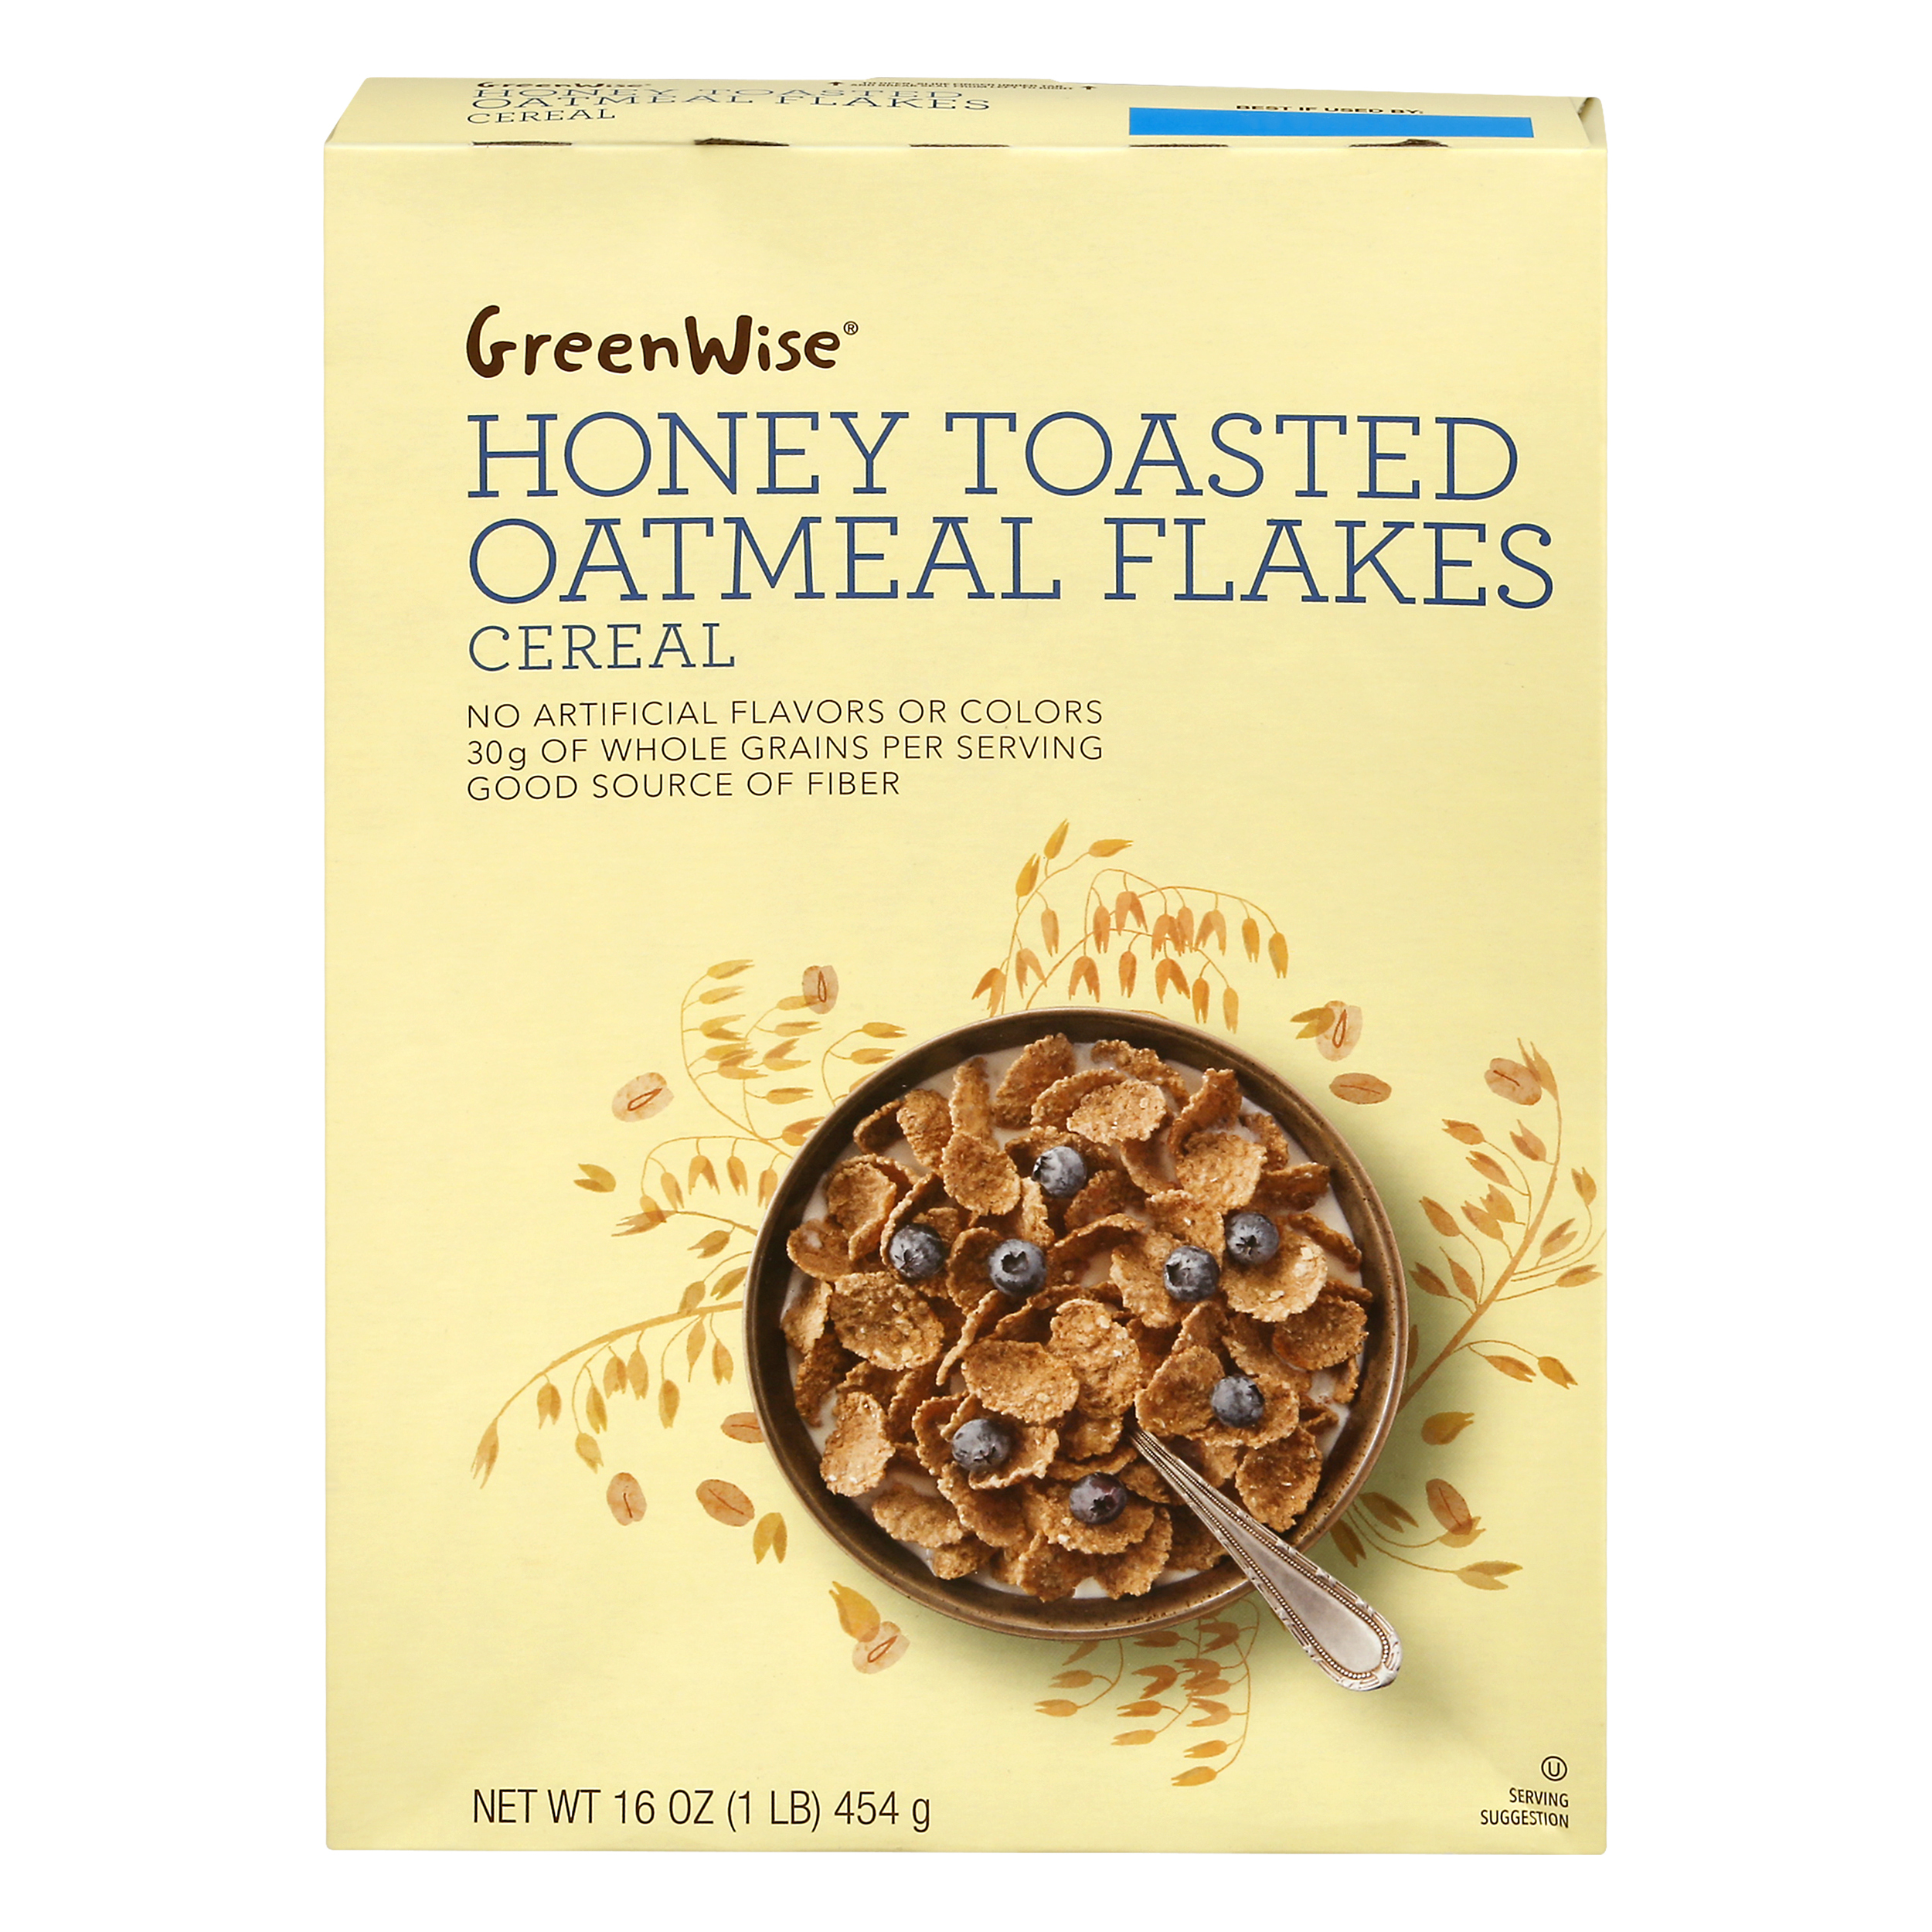 GreenWise Oatmeal Flakes Honey Toasted Cereal 16 oz BOX